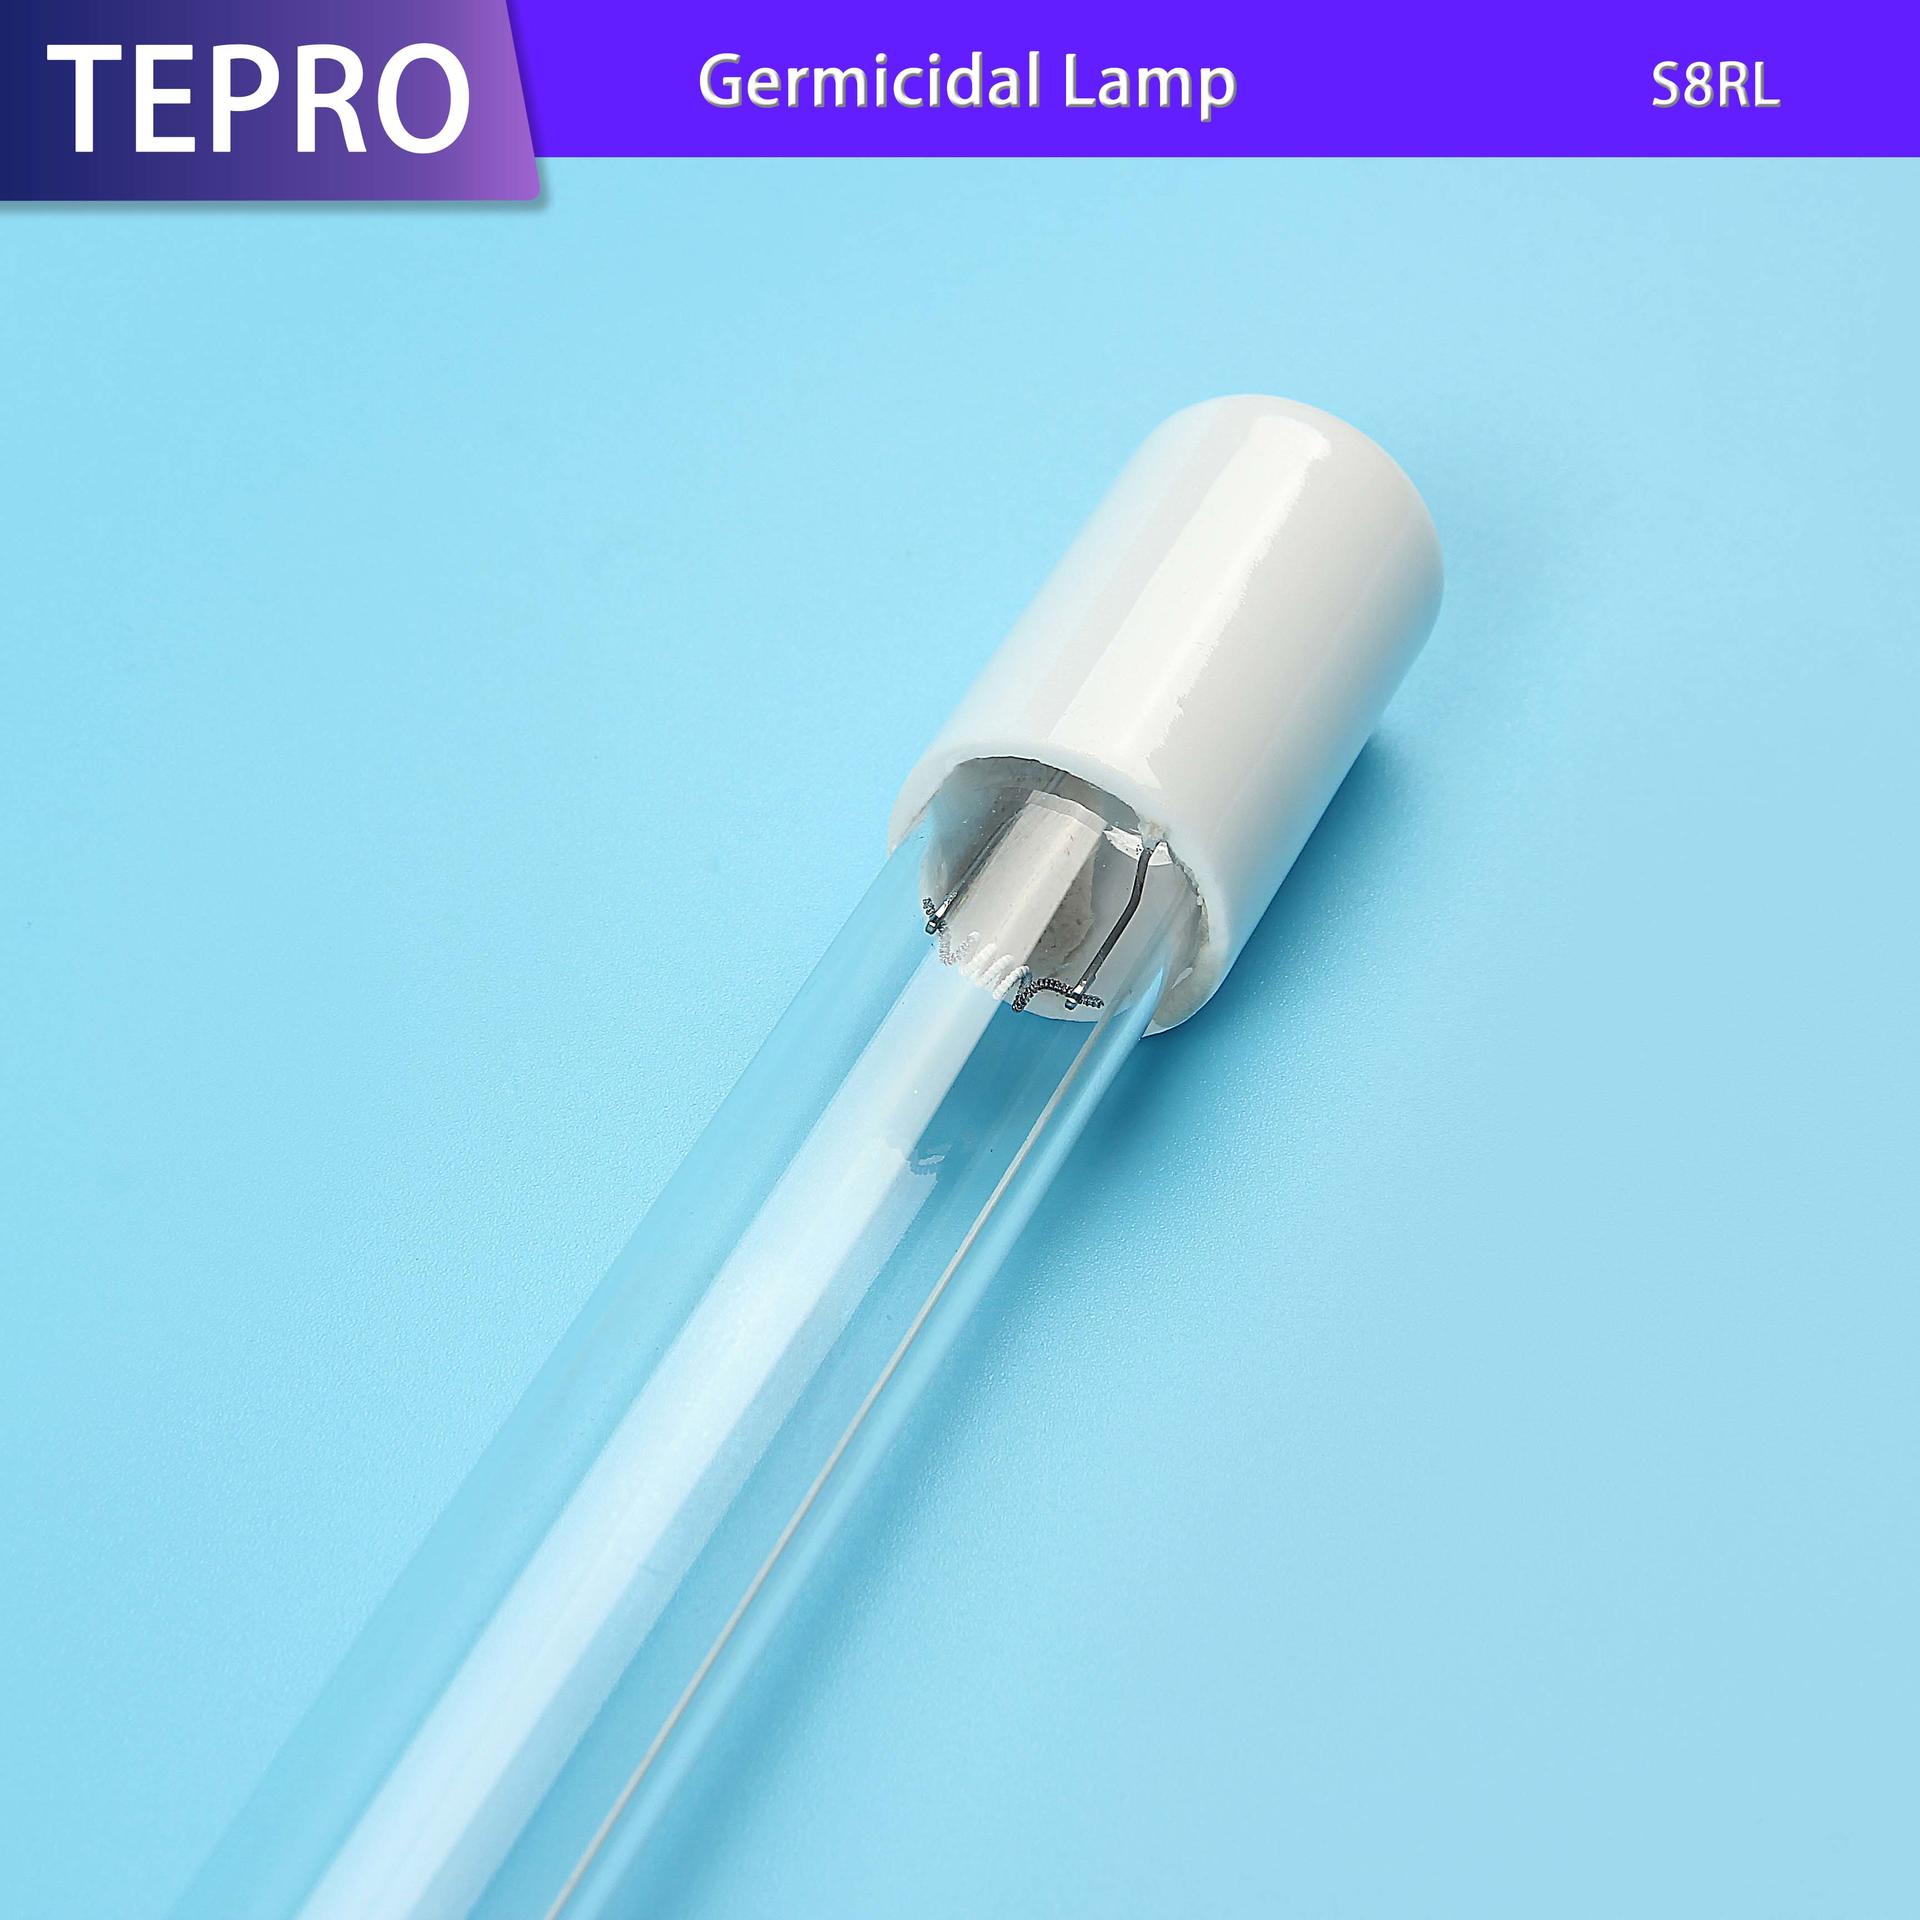 R-CAN Germicidal UV Replacement Lamps S8RL